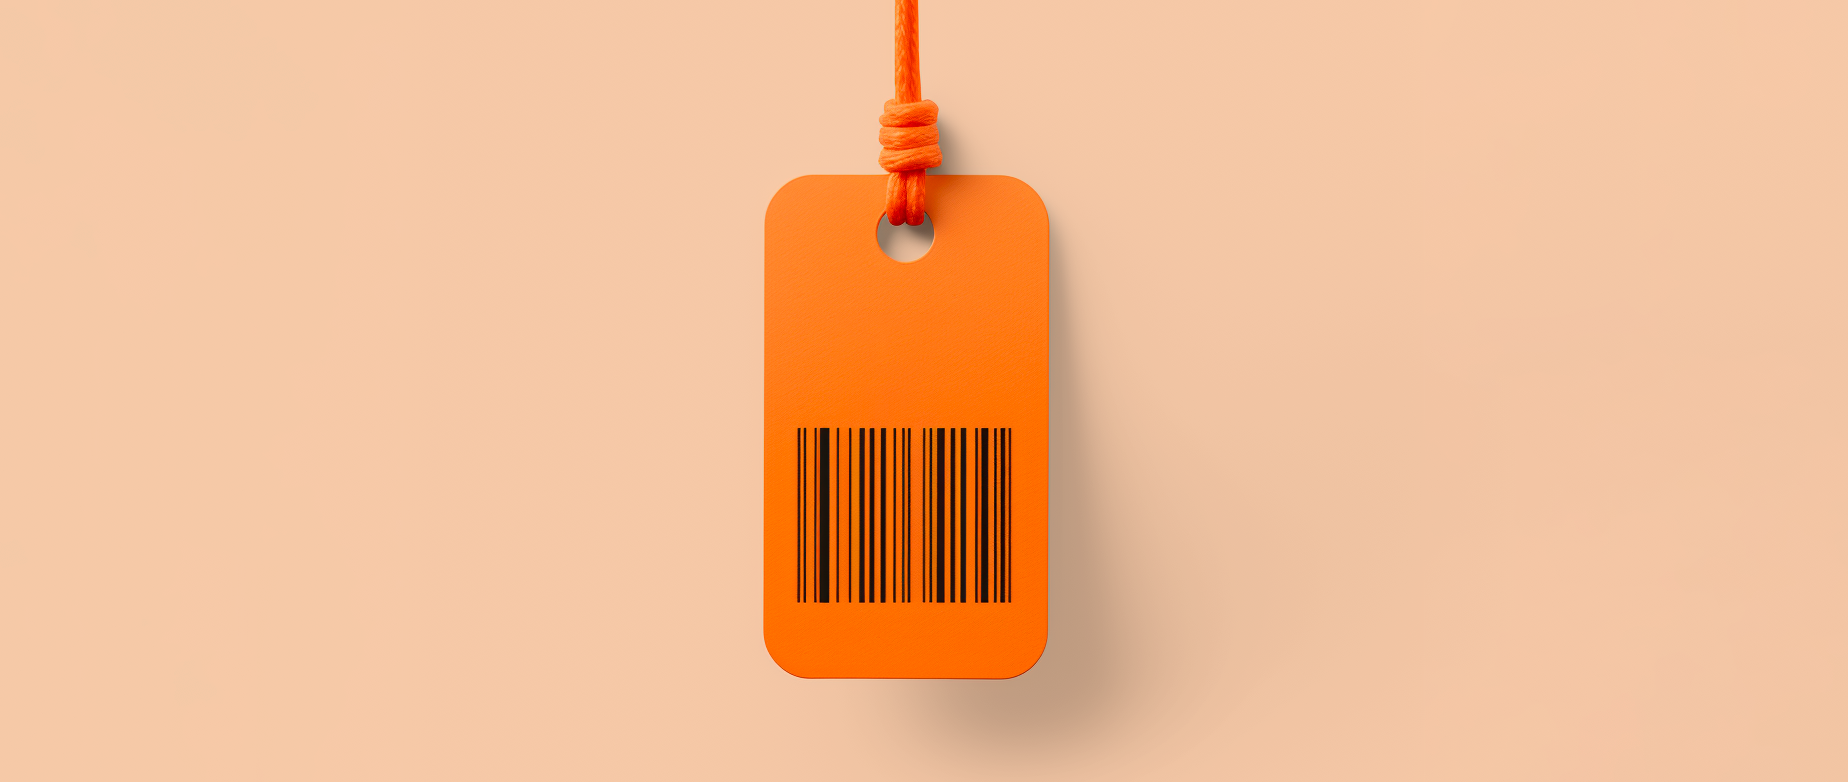 Illustration of a barcode to represent the topic of universal product codes.